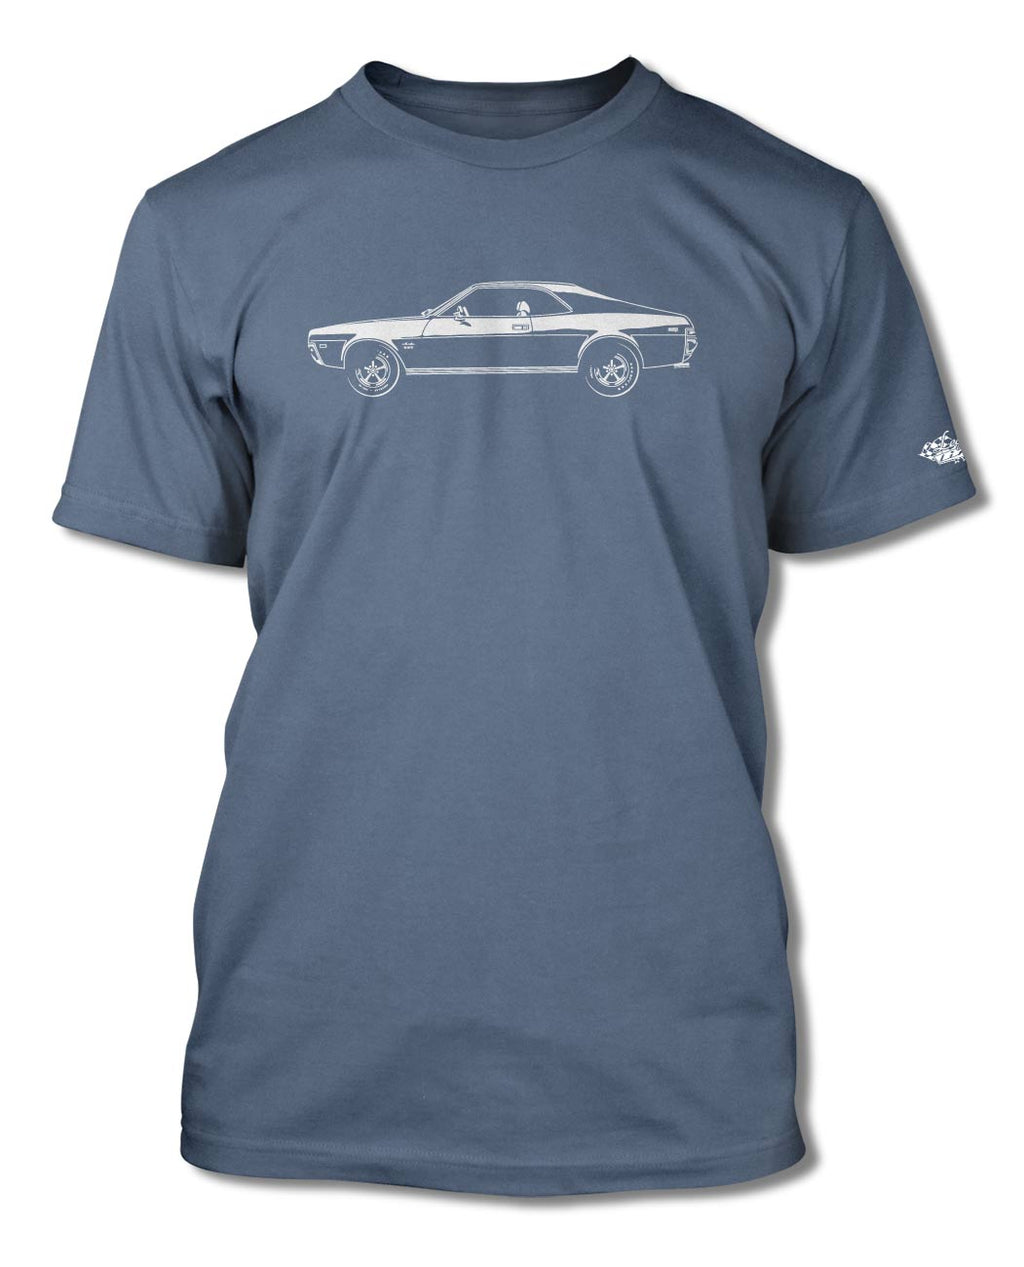 1969 AMC Javelin Coupe T-Shirt - Men - Side View